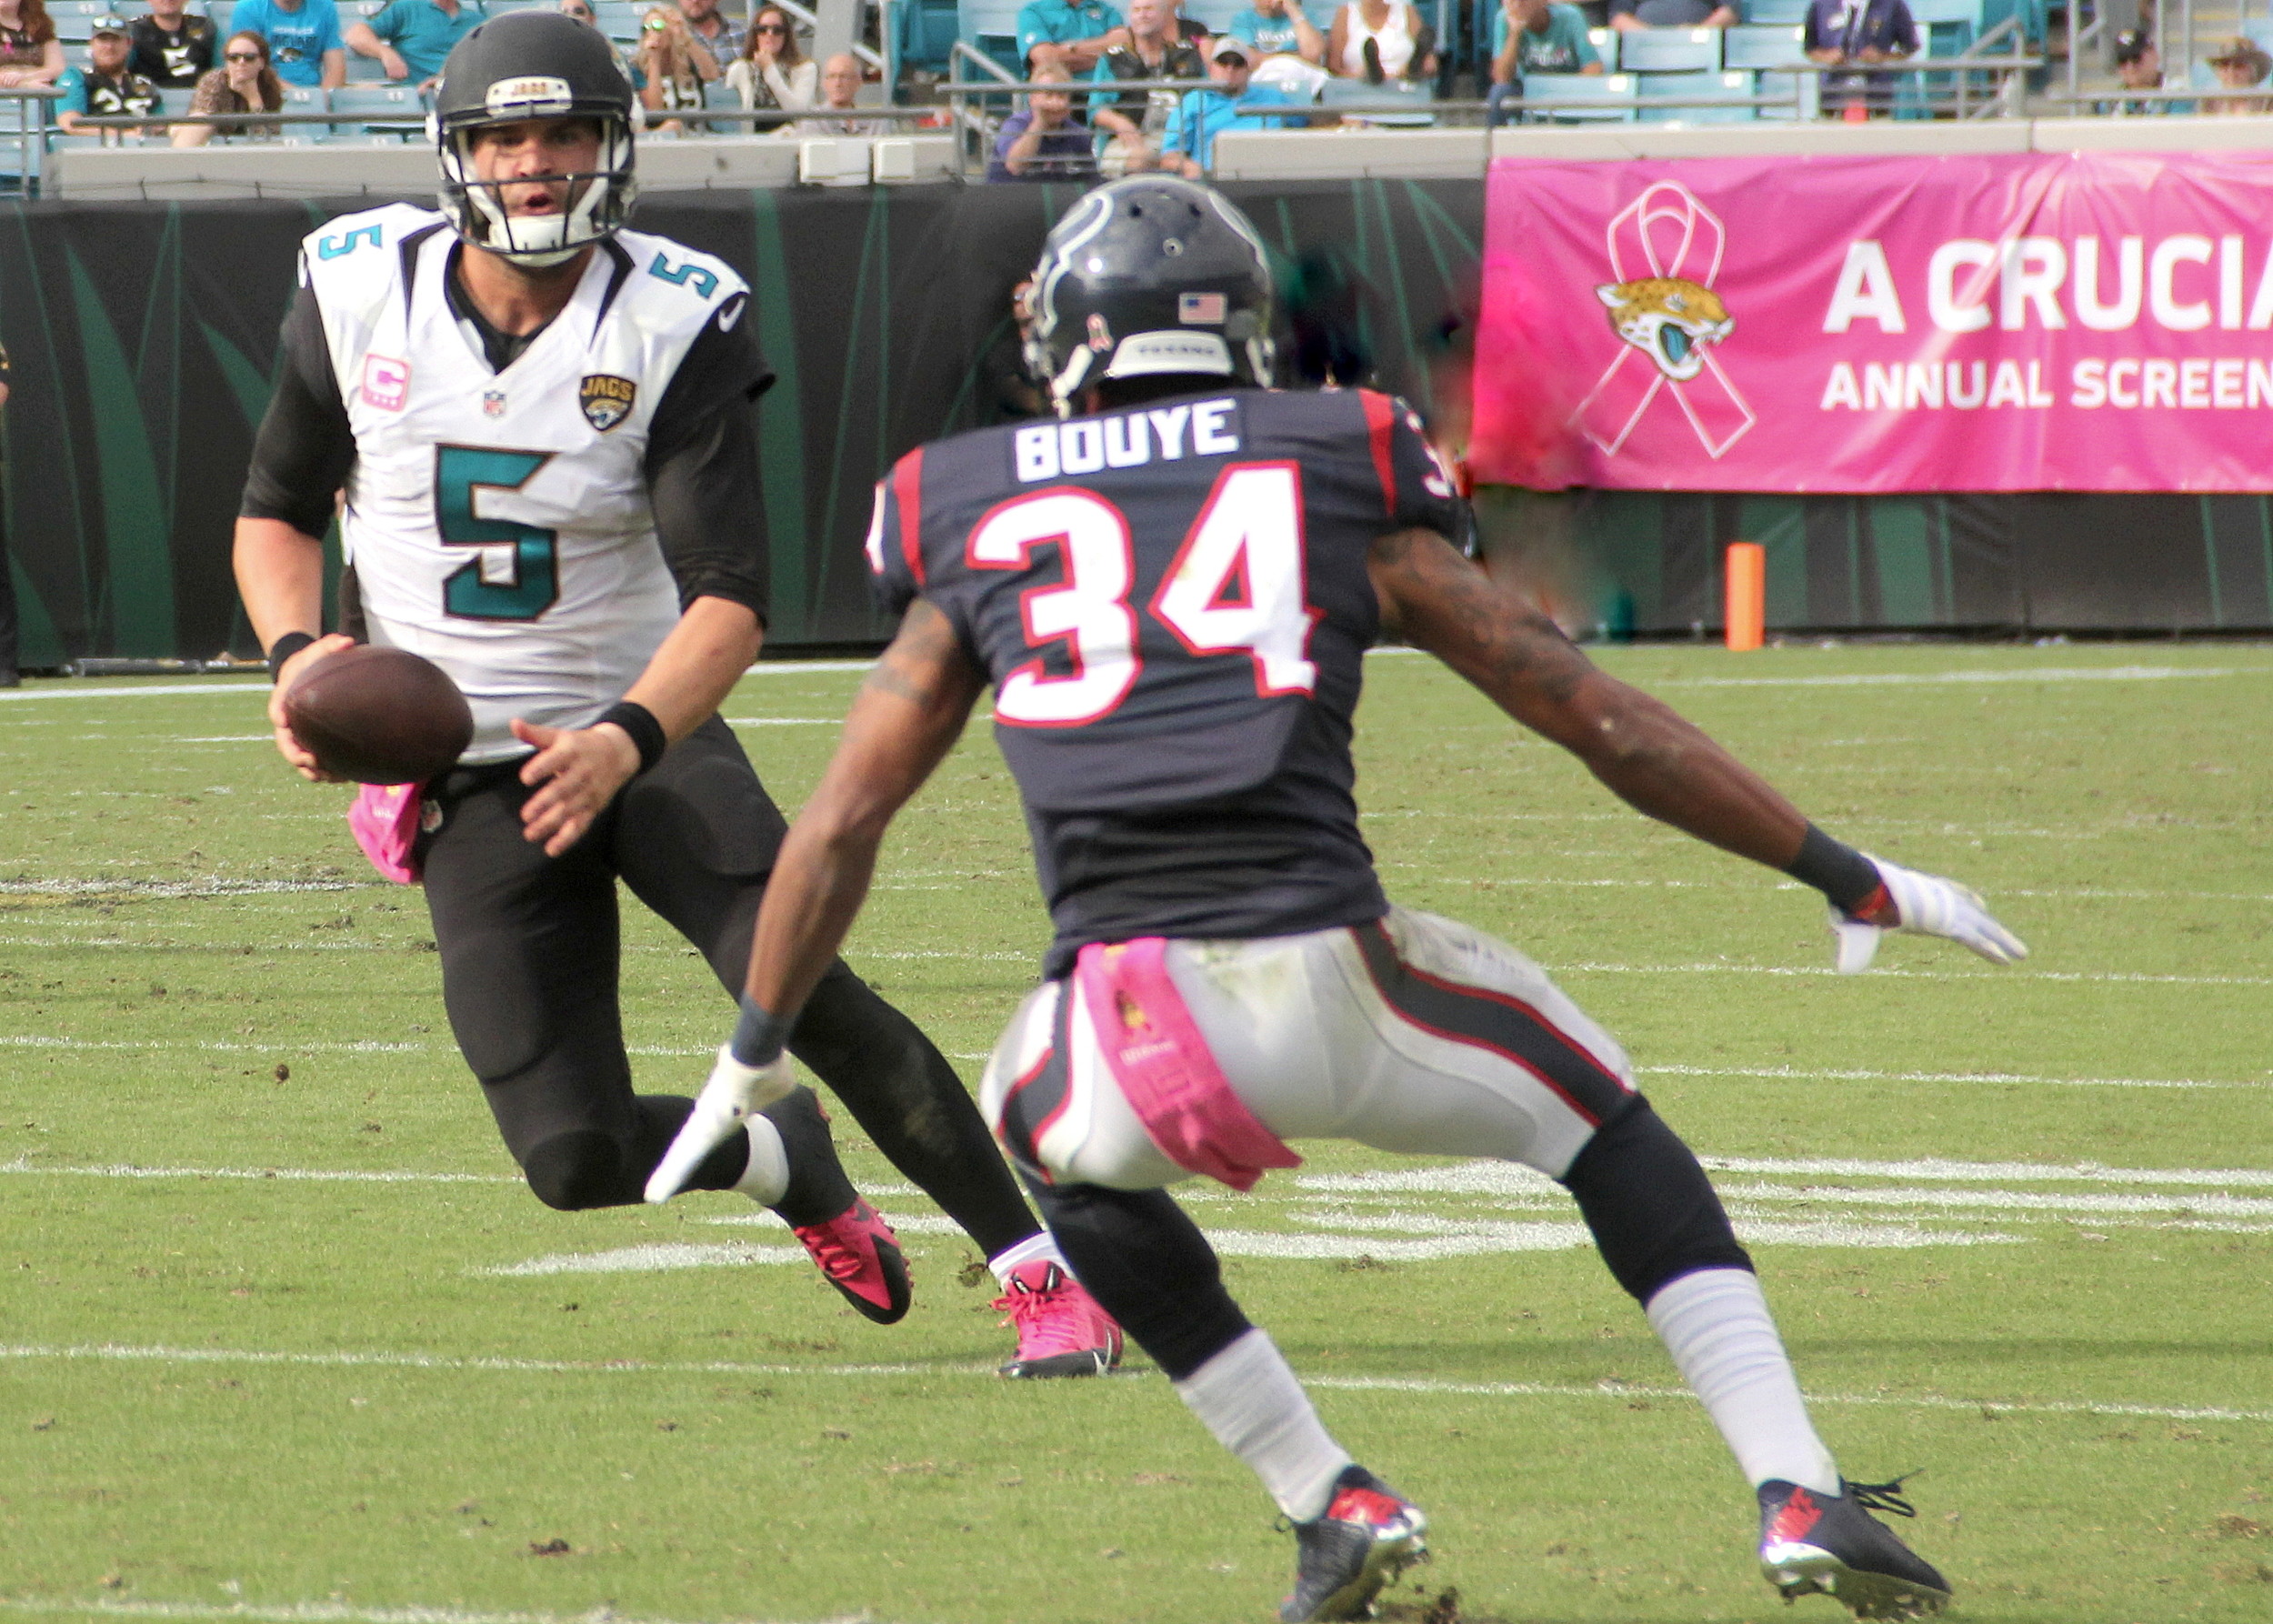 Jaguars’ QB Blake Bortles was 23 of 53 for 336 yards, was sacked twice and threw three interceptions.